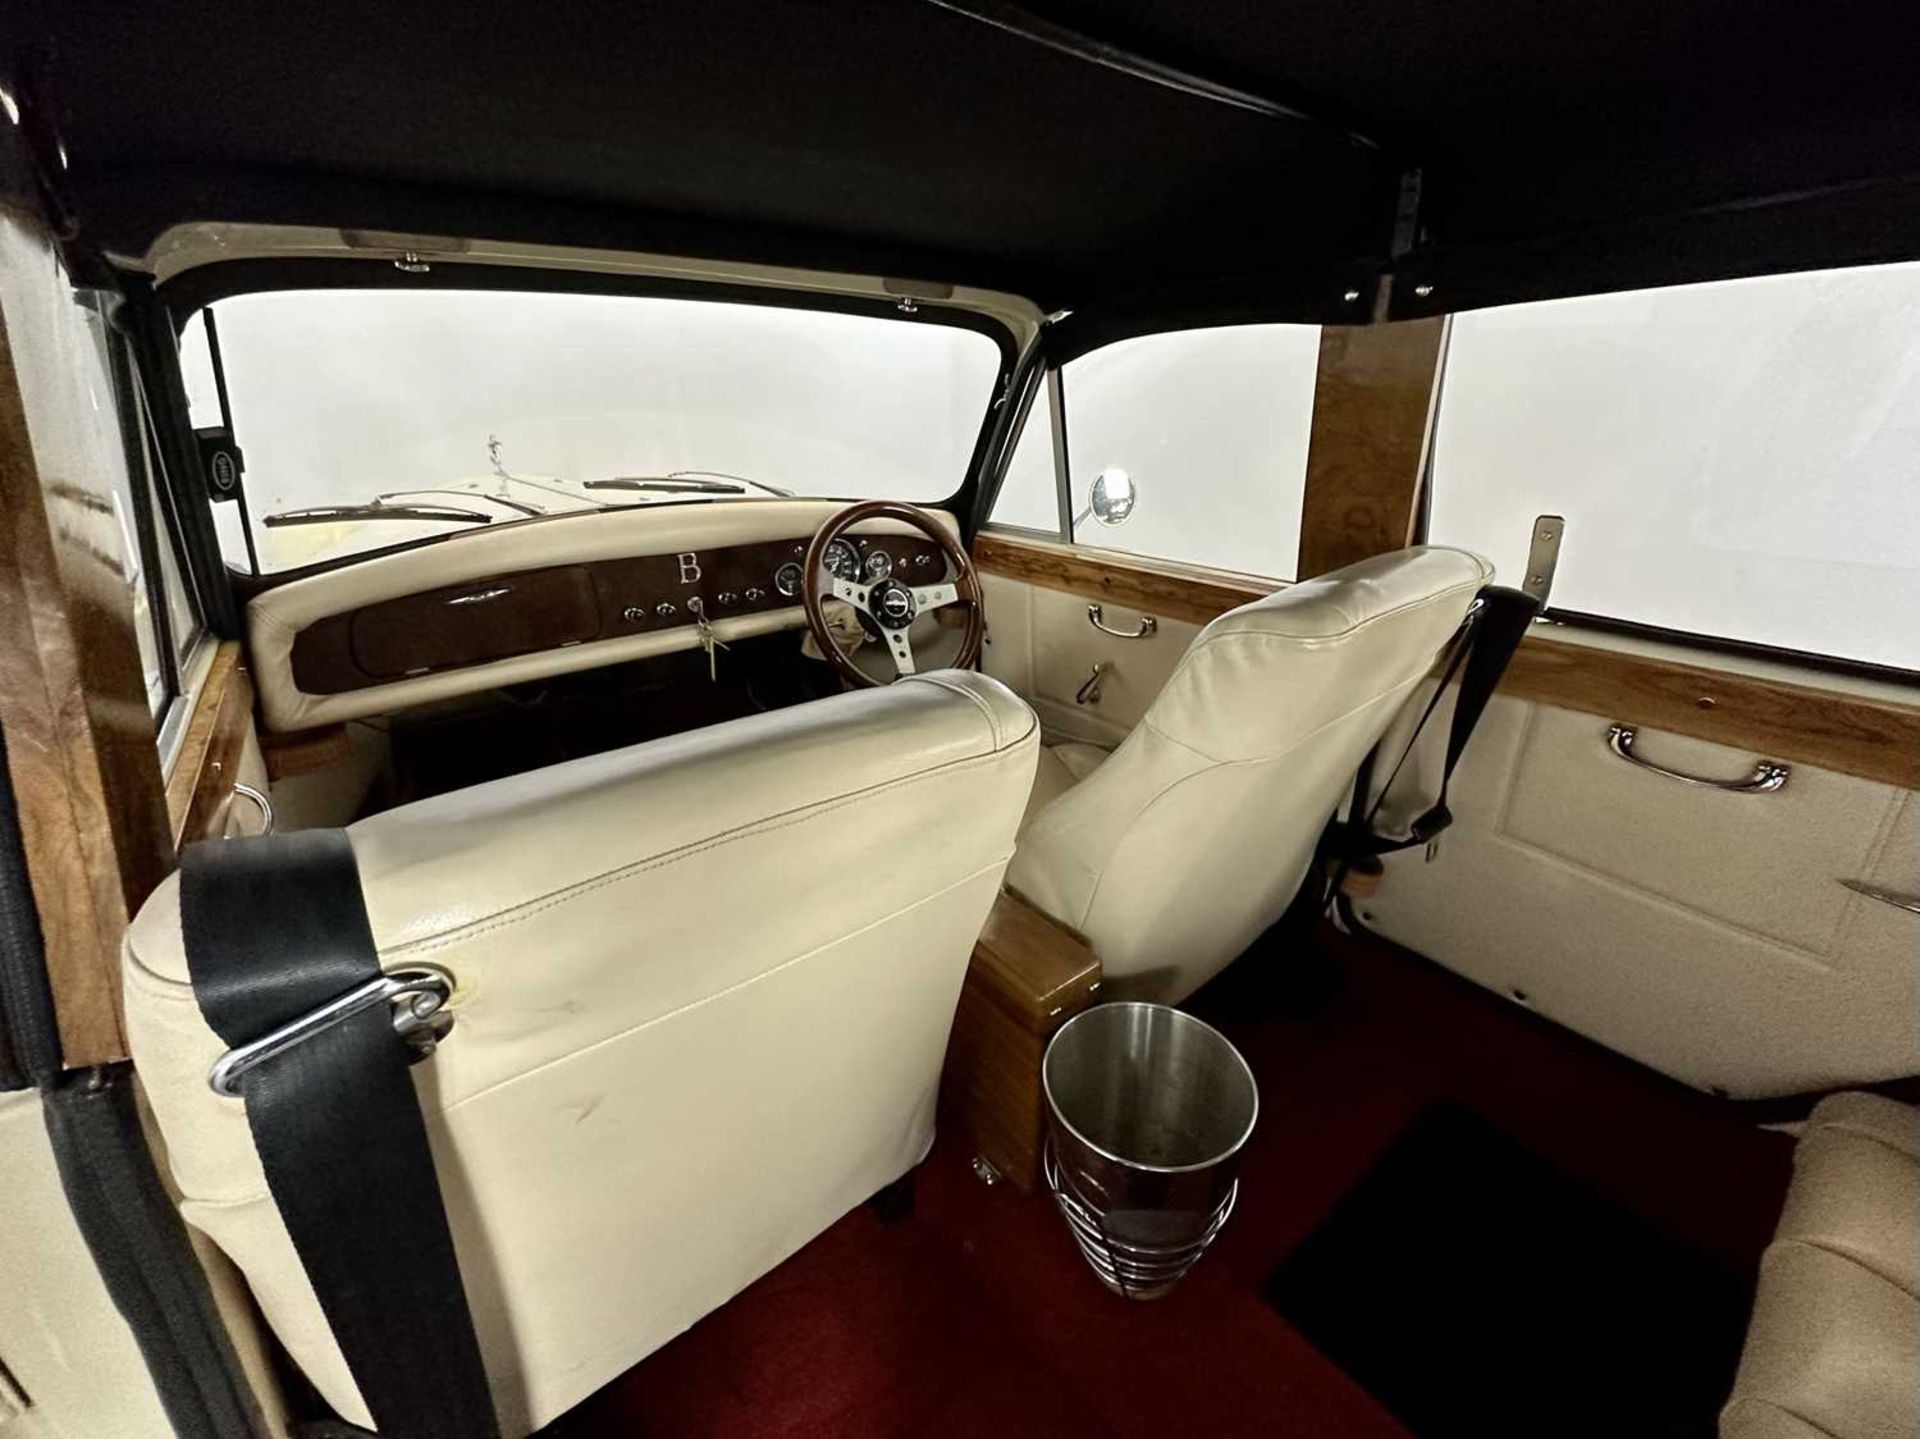 1979 Beauford S4 - Image 26 of 38